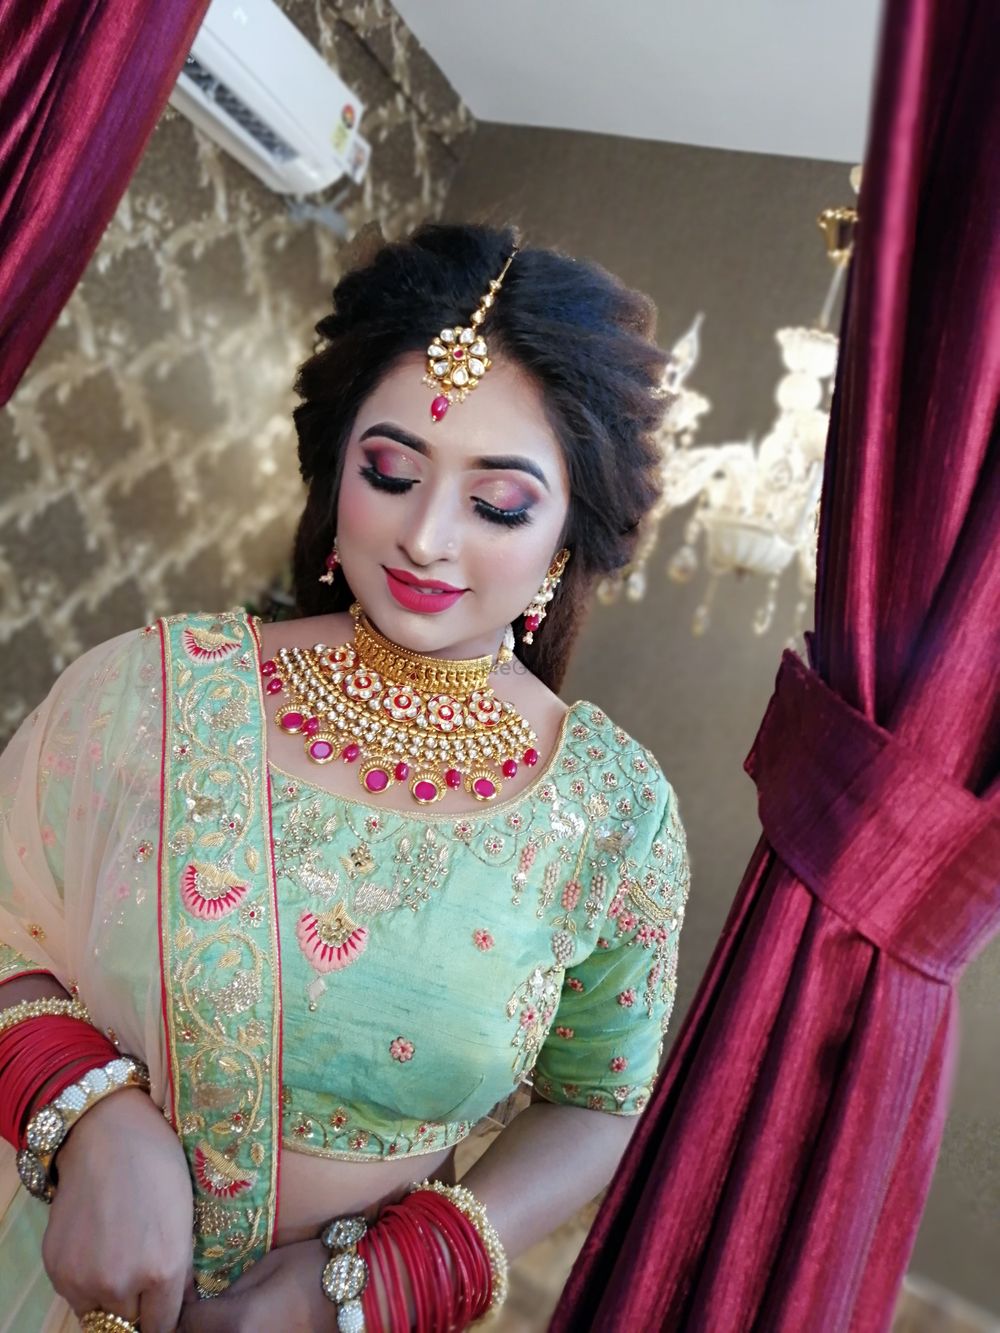 Photo From THE BRIDE - By Bridal Makeup Artist Rumpa